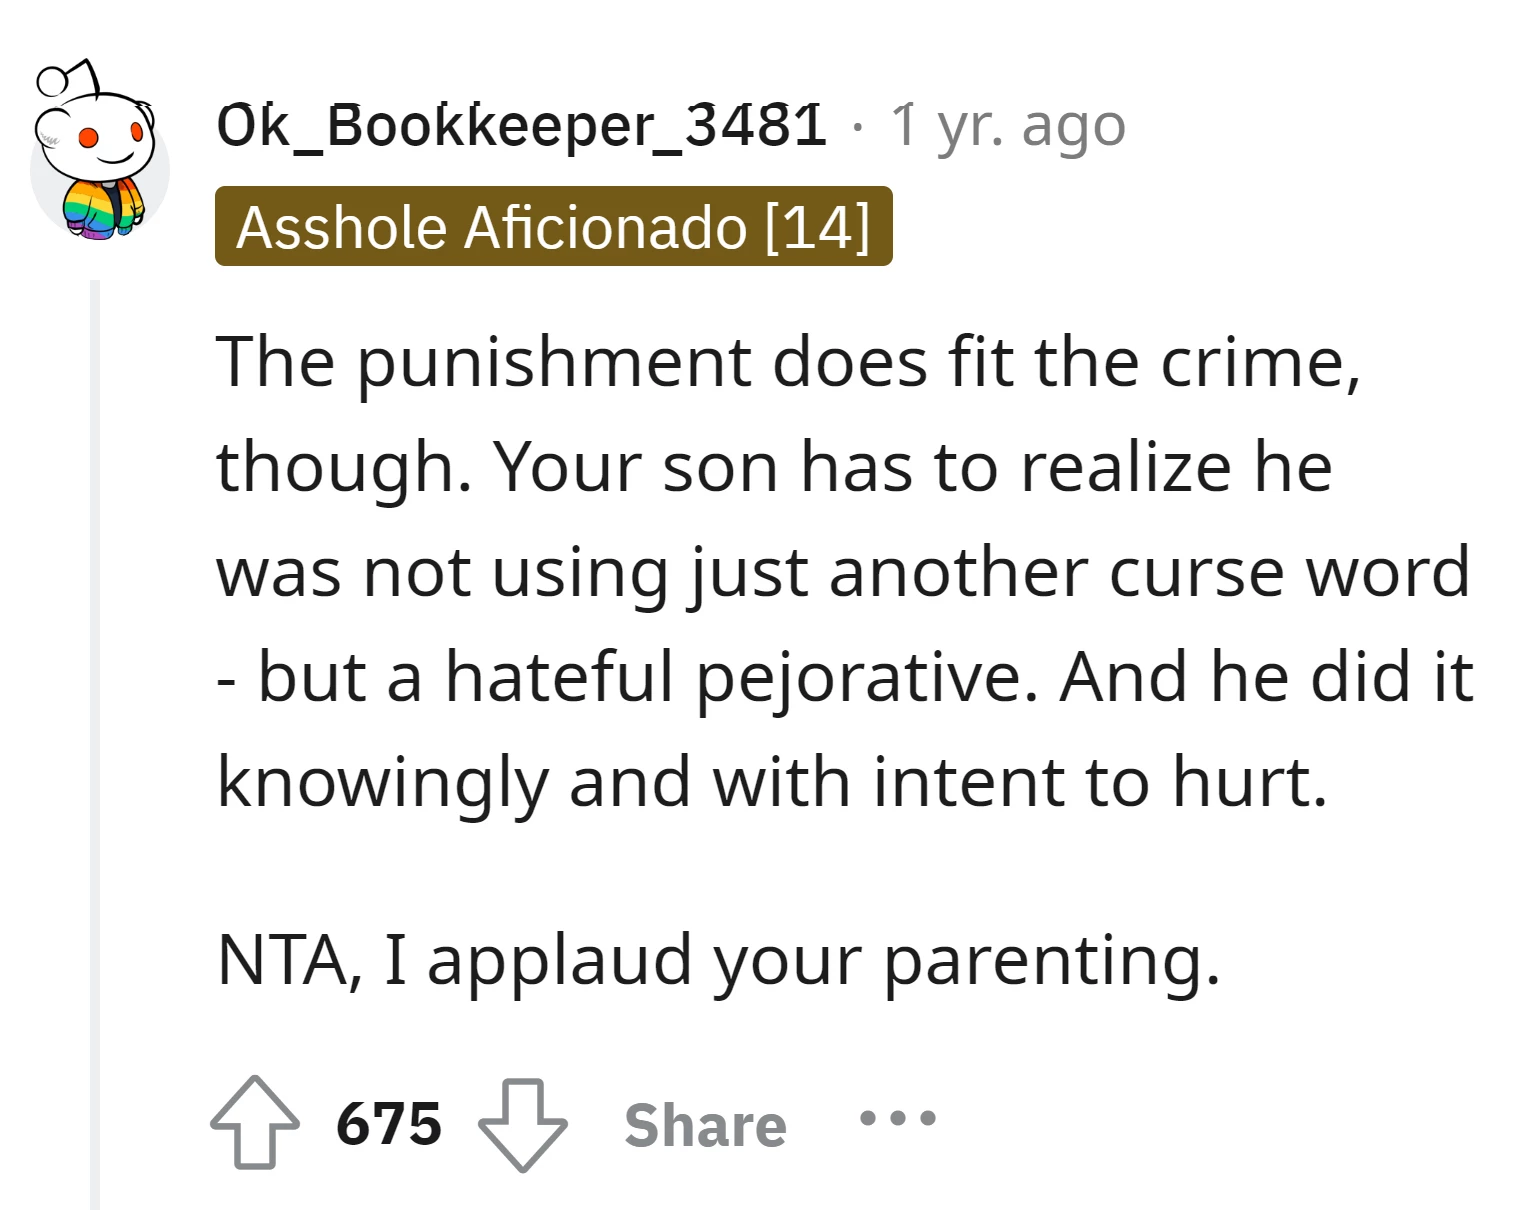 "I applaud your parenting"